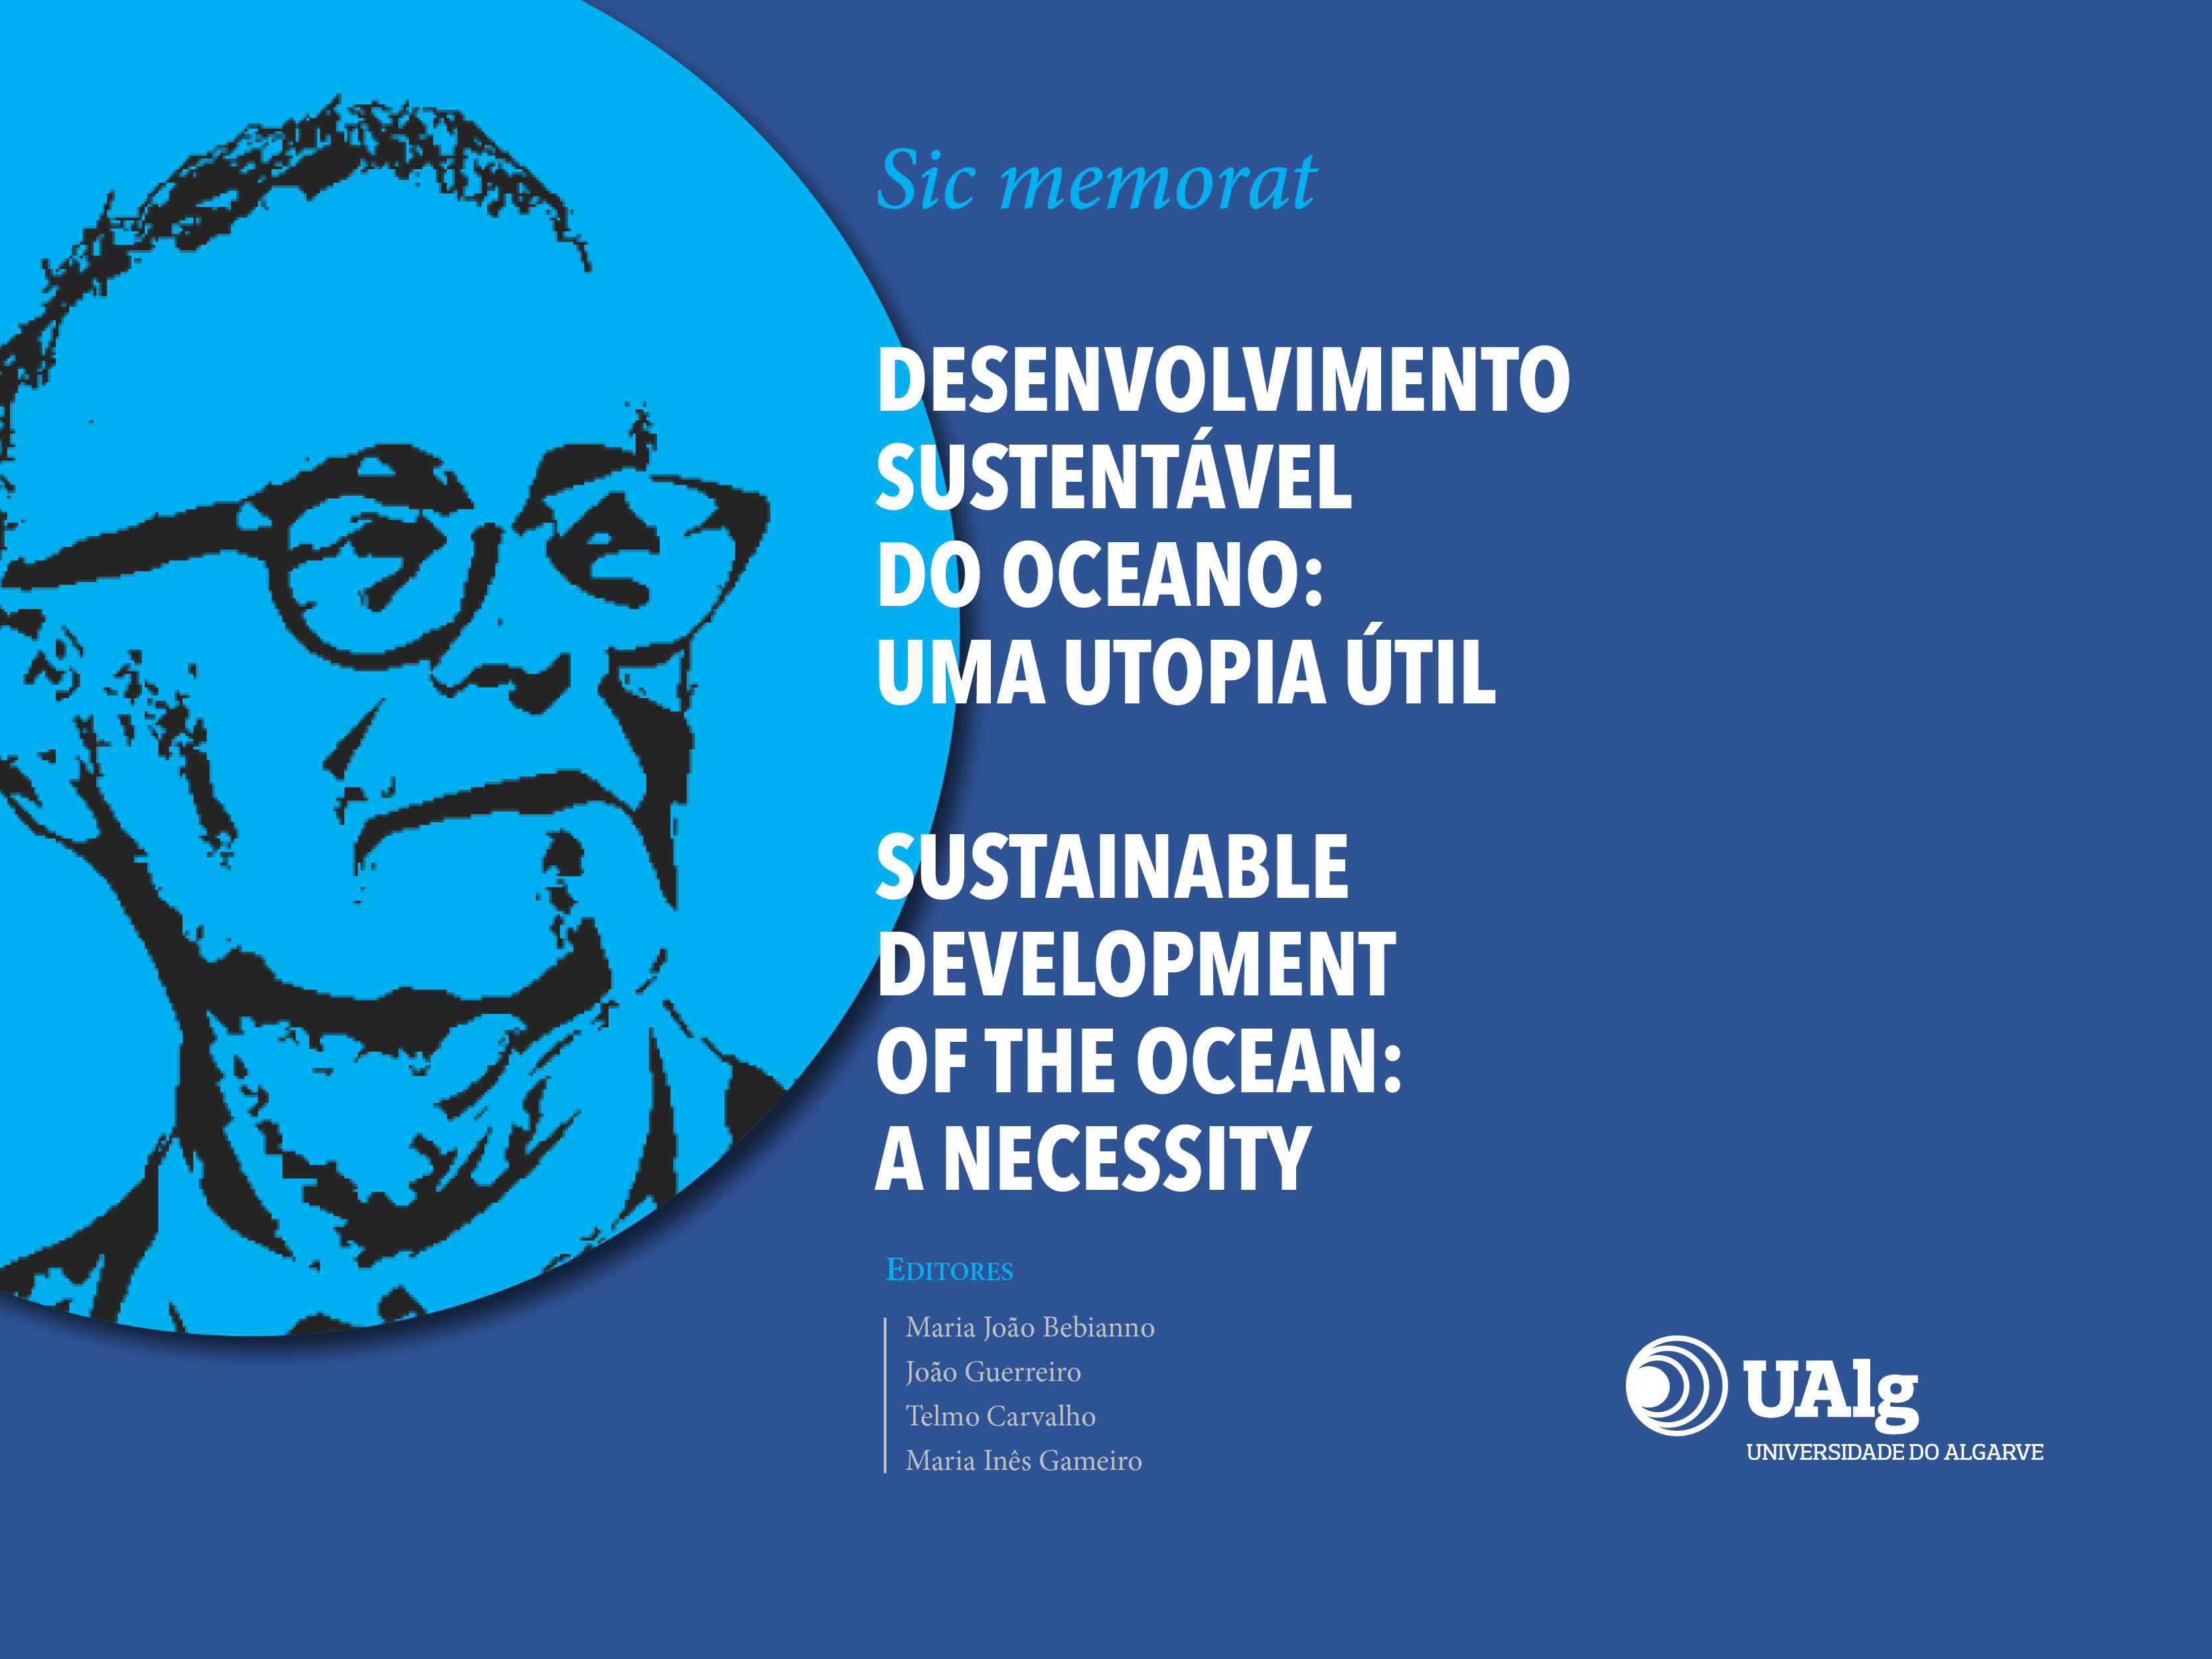 Sustainable Development of the Ocean: A Necessity